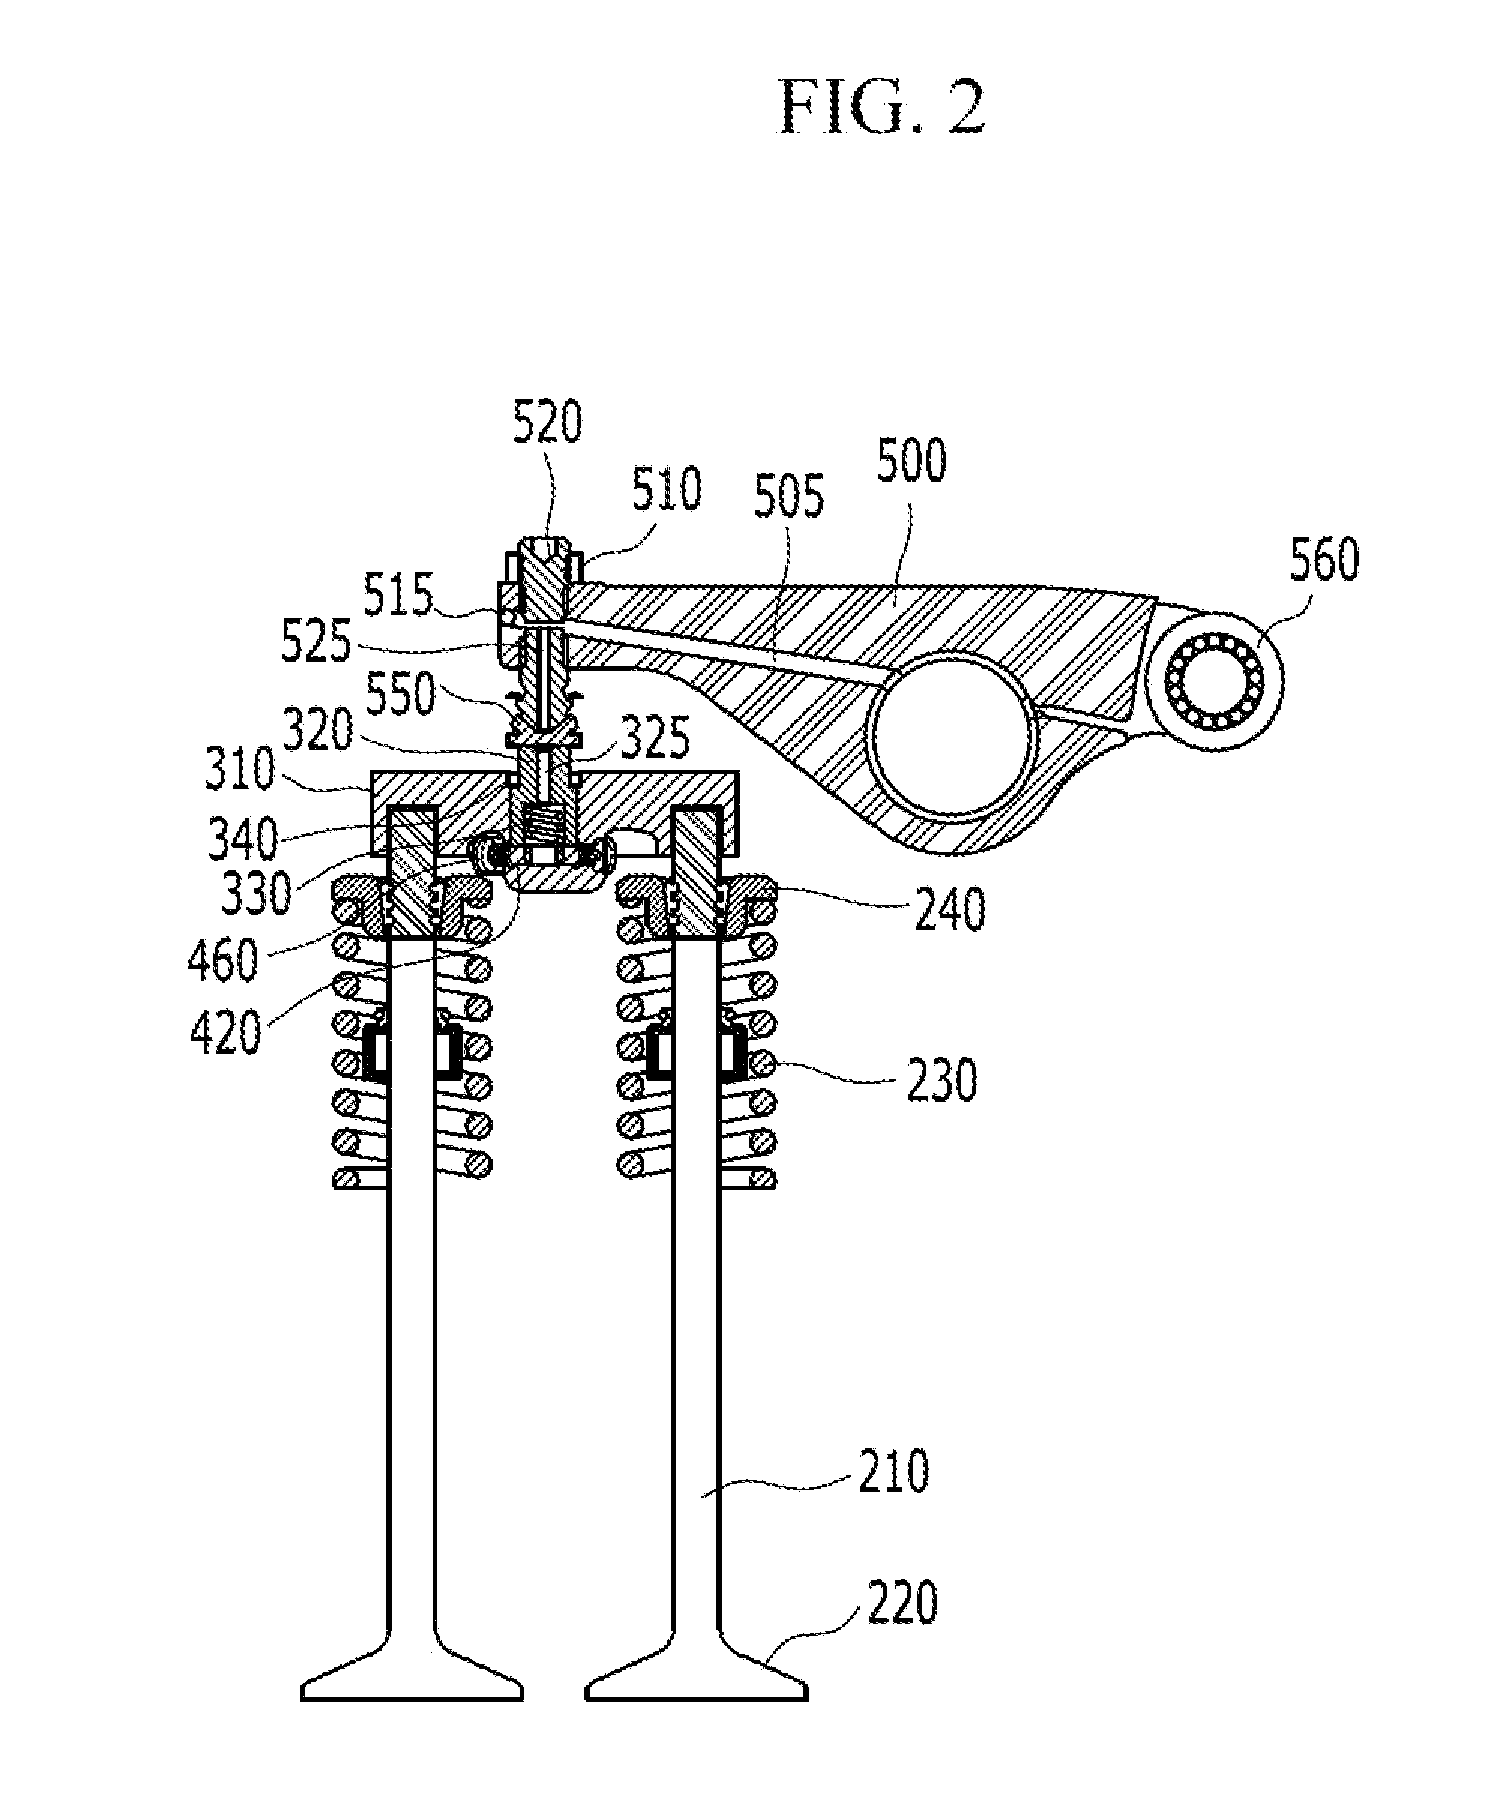 Variable valve actuator assembly integrated with valve bridge